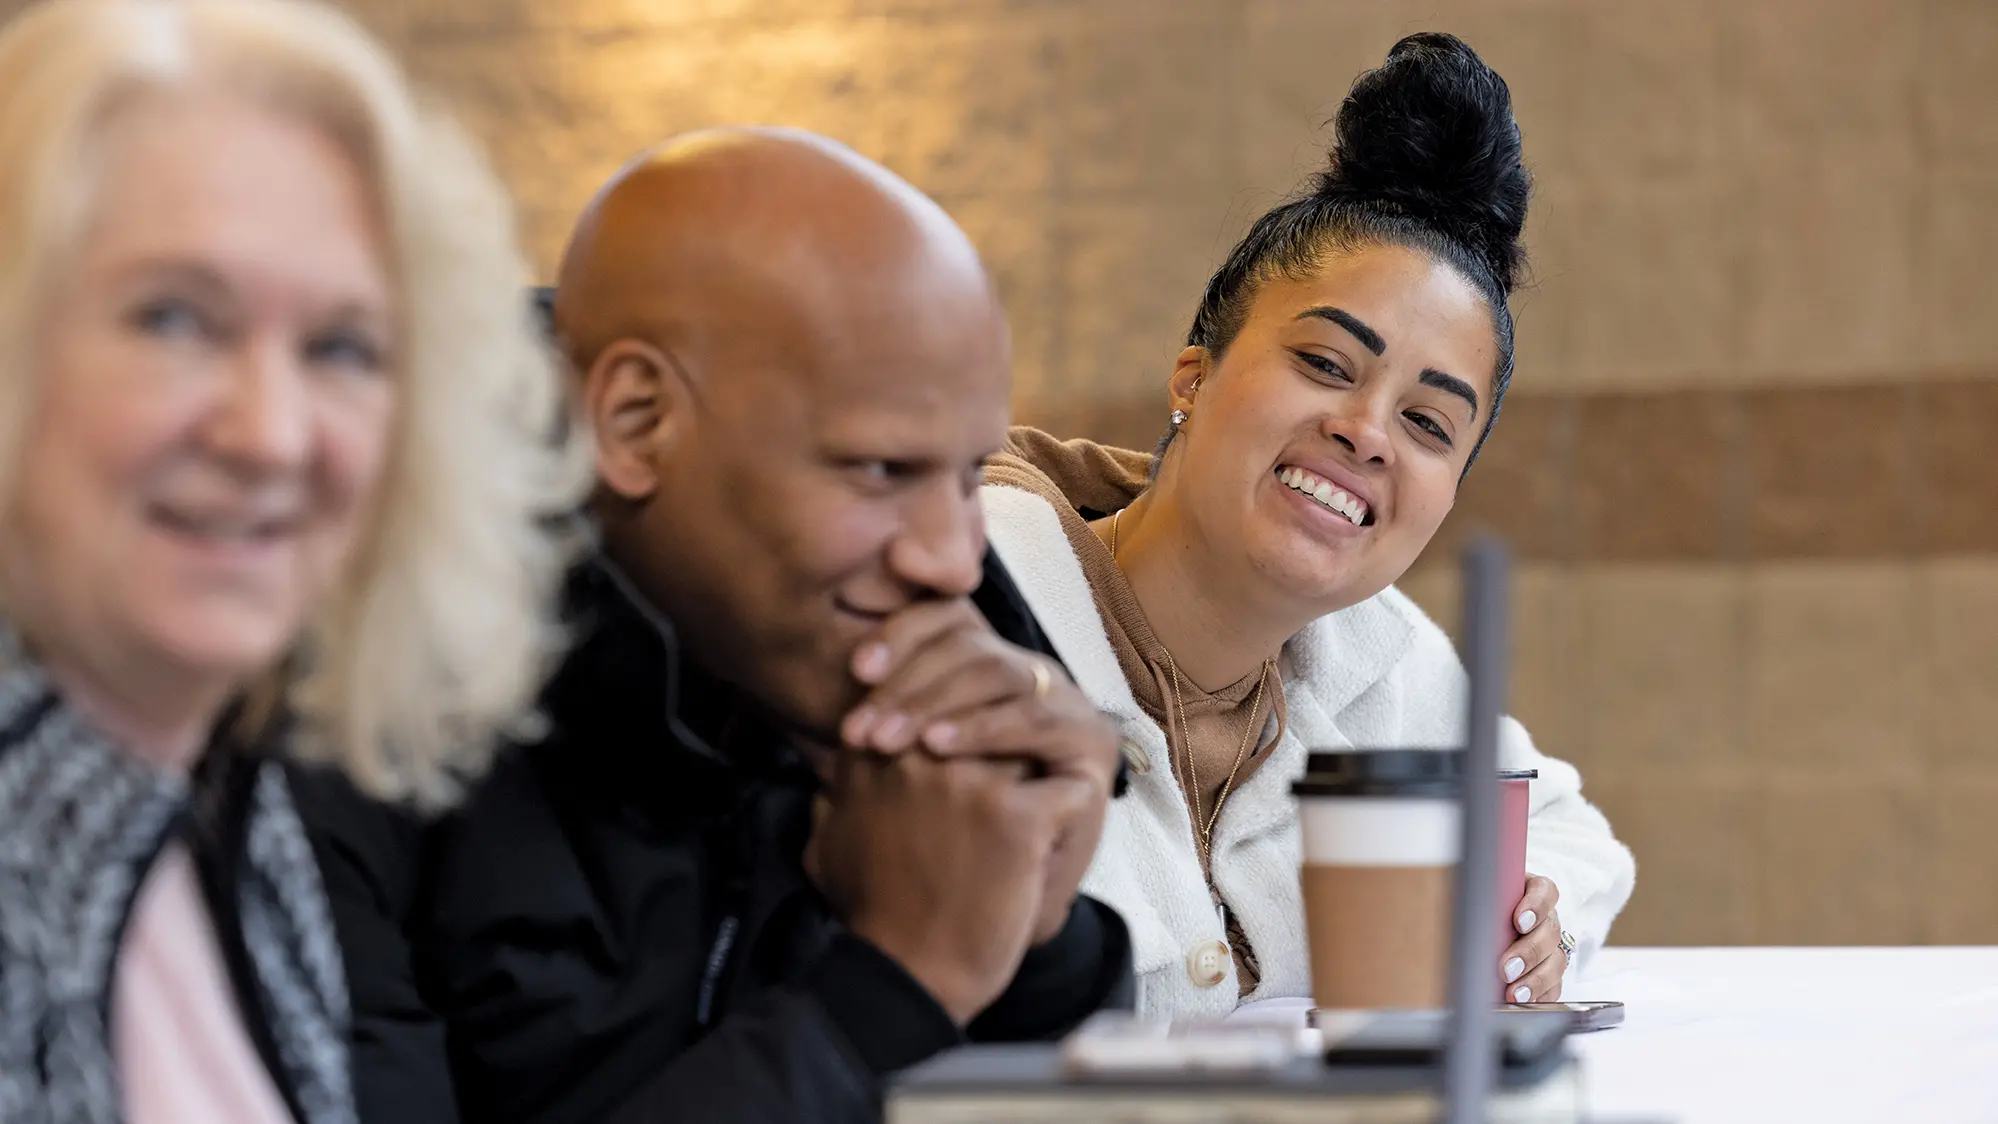 Of the three people in this photo, shown sitting at a table at a meeting, the focus is on a pretty Black woman whose head is wrapped into a high bun on top of her head. She’s smiling like she really enjoys what is being said as beside her, her husband, smiles, too, with his hands folded in front of his mouth. The person closest to the camera is an older blond woman watching the speaker.